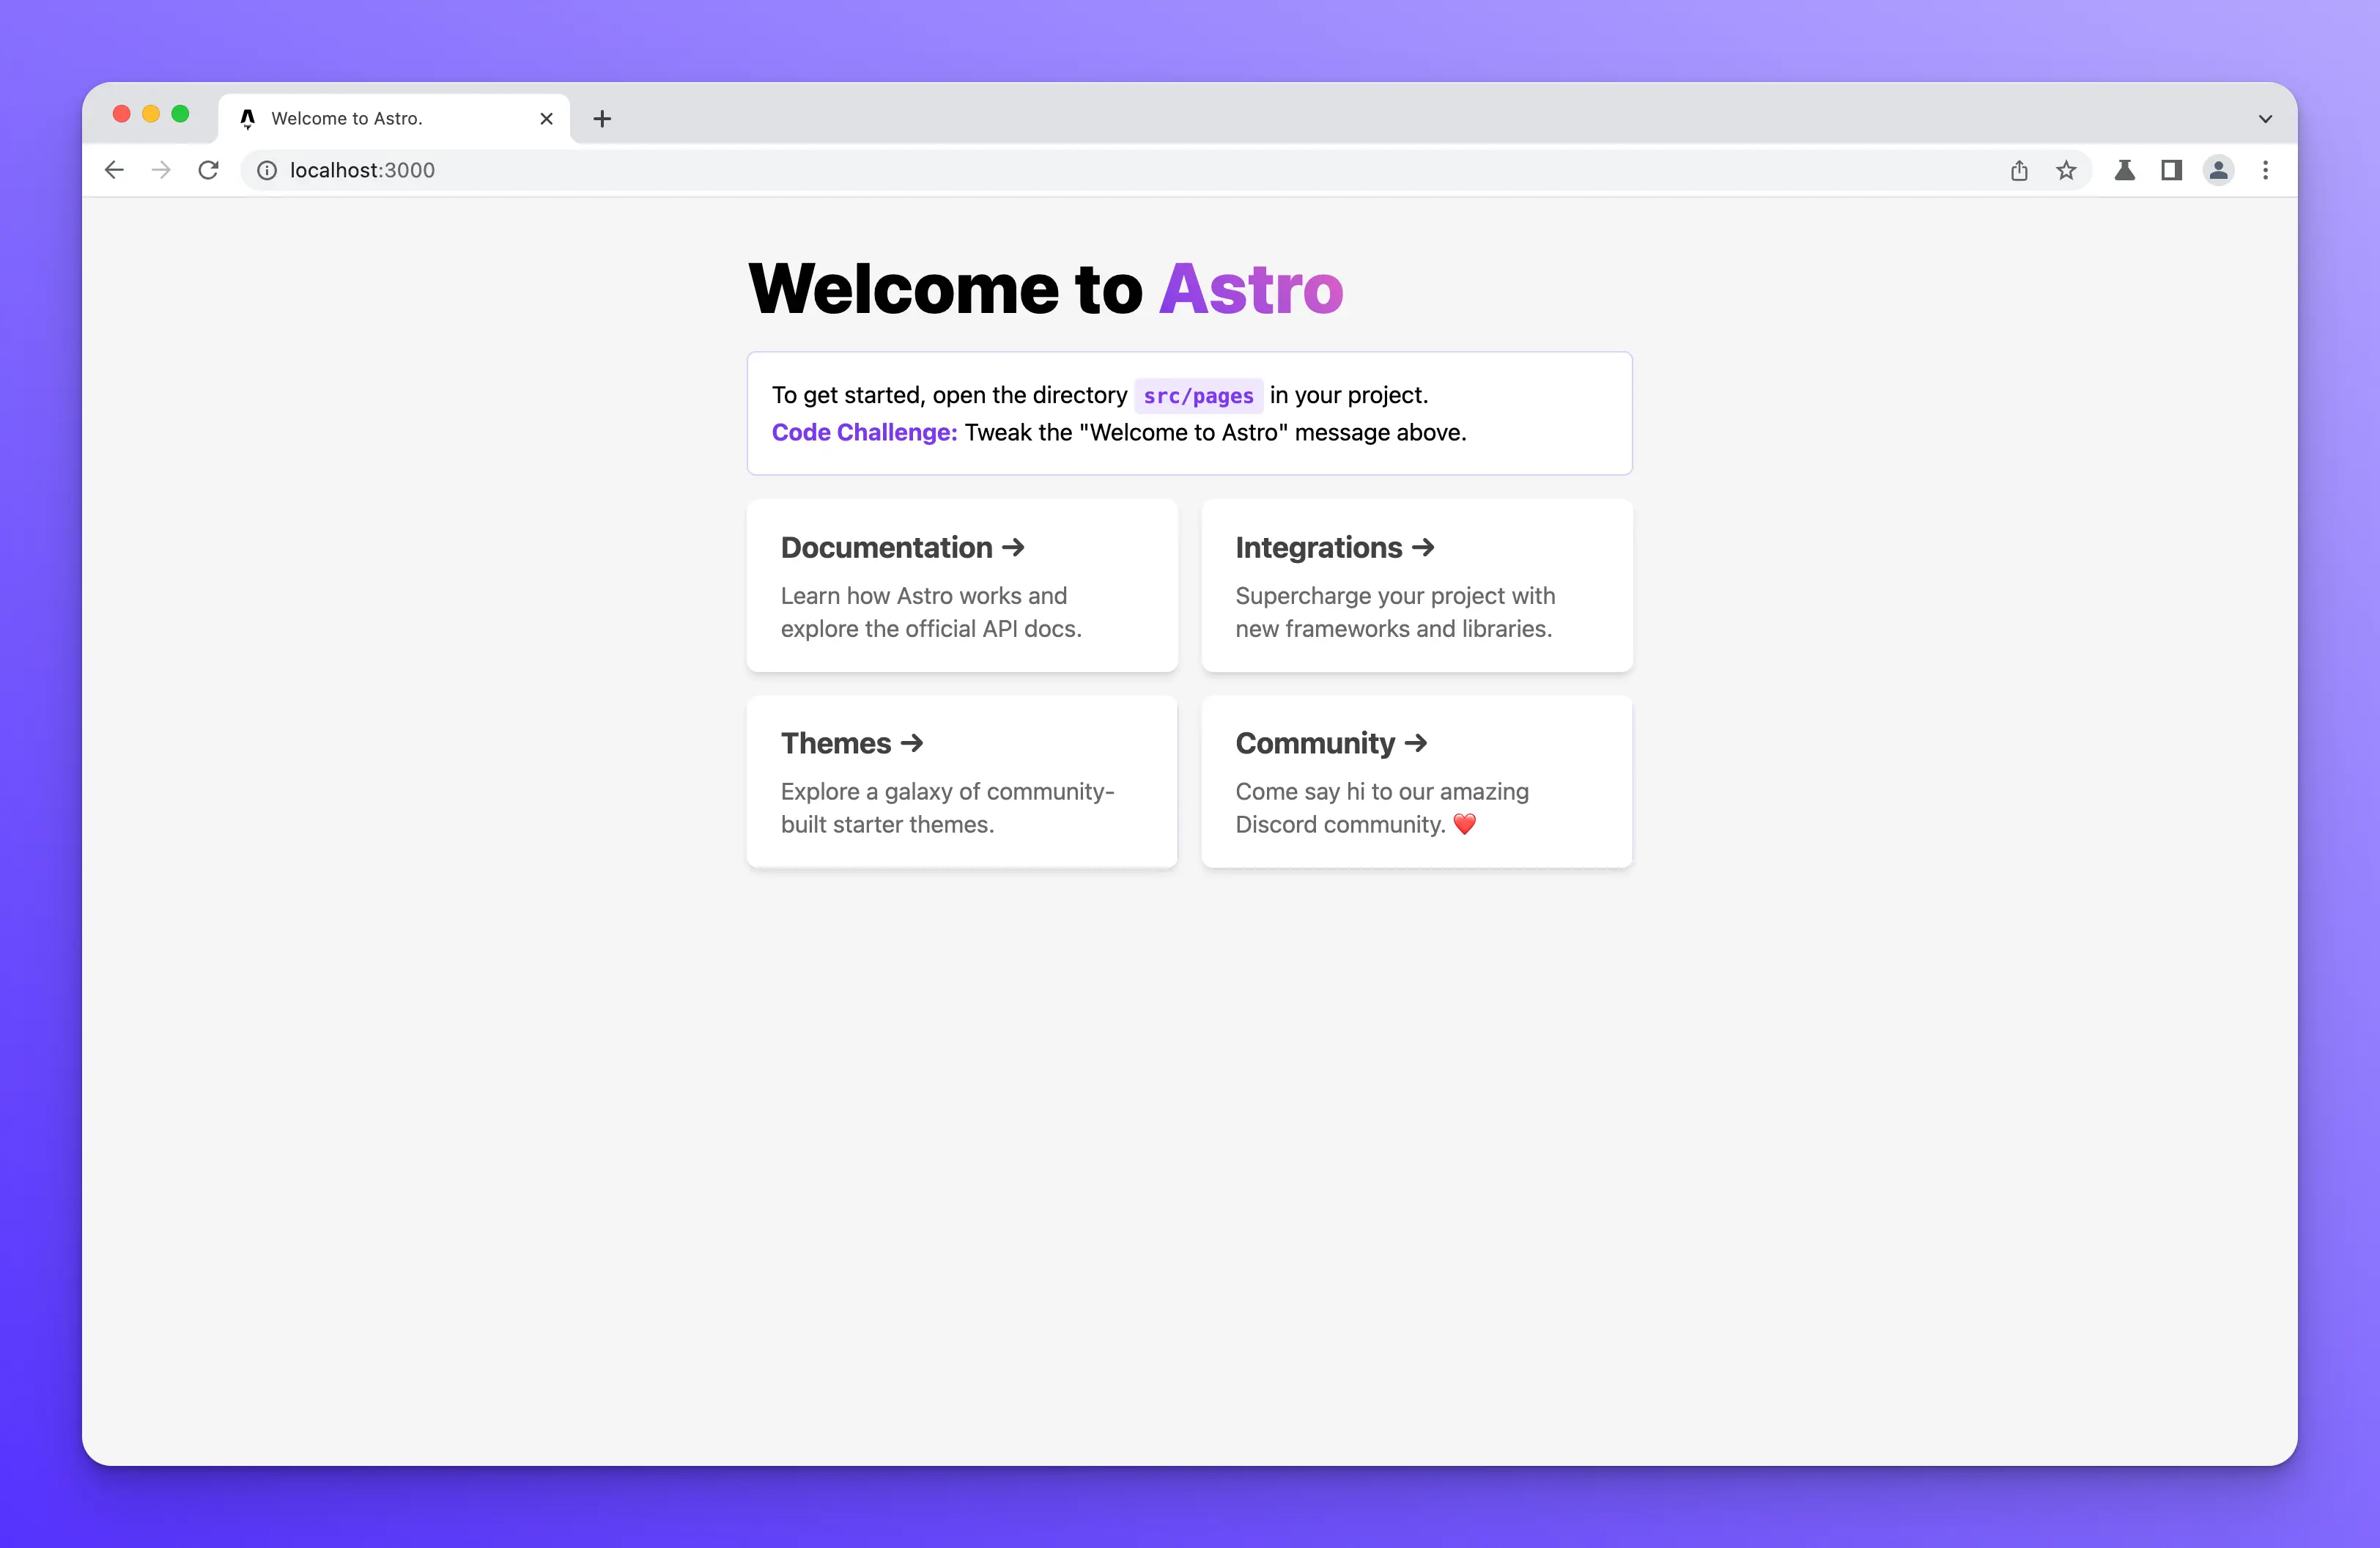 astro-welcome-screen.png